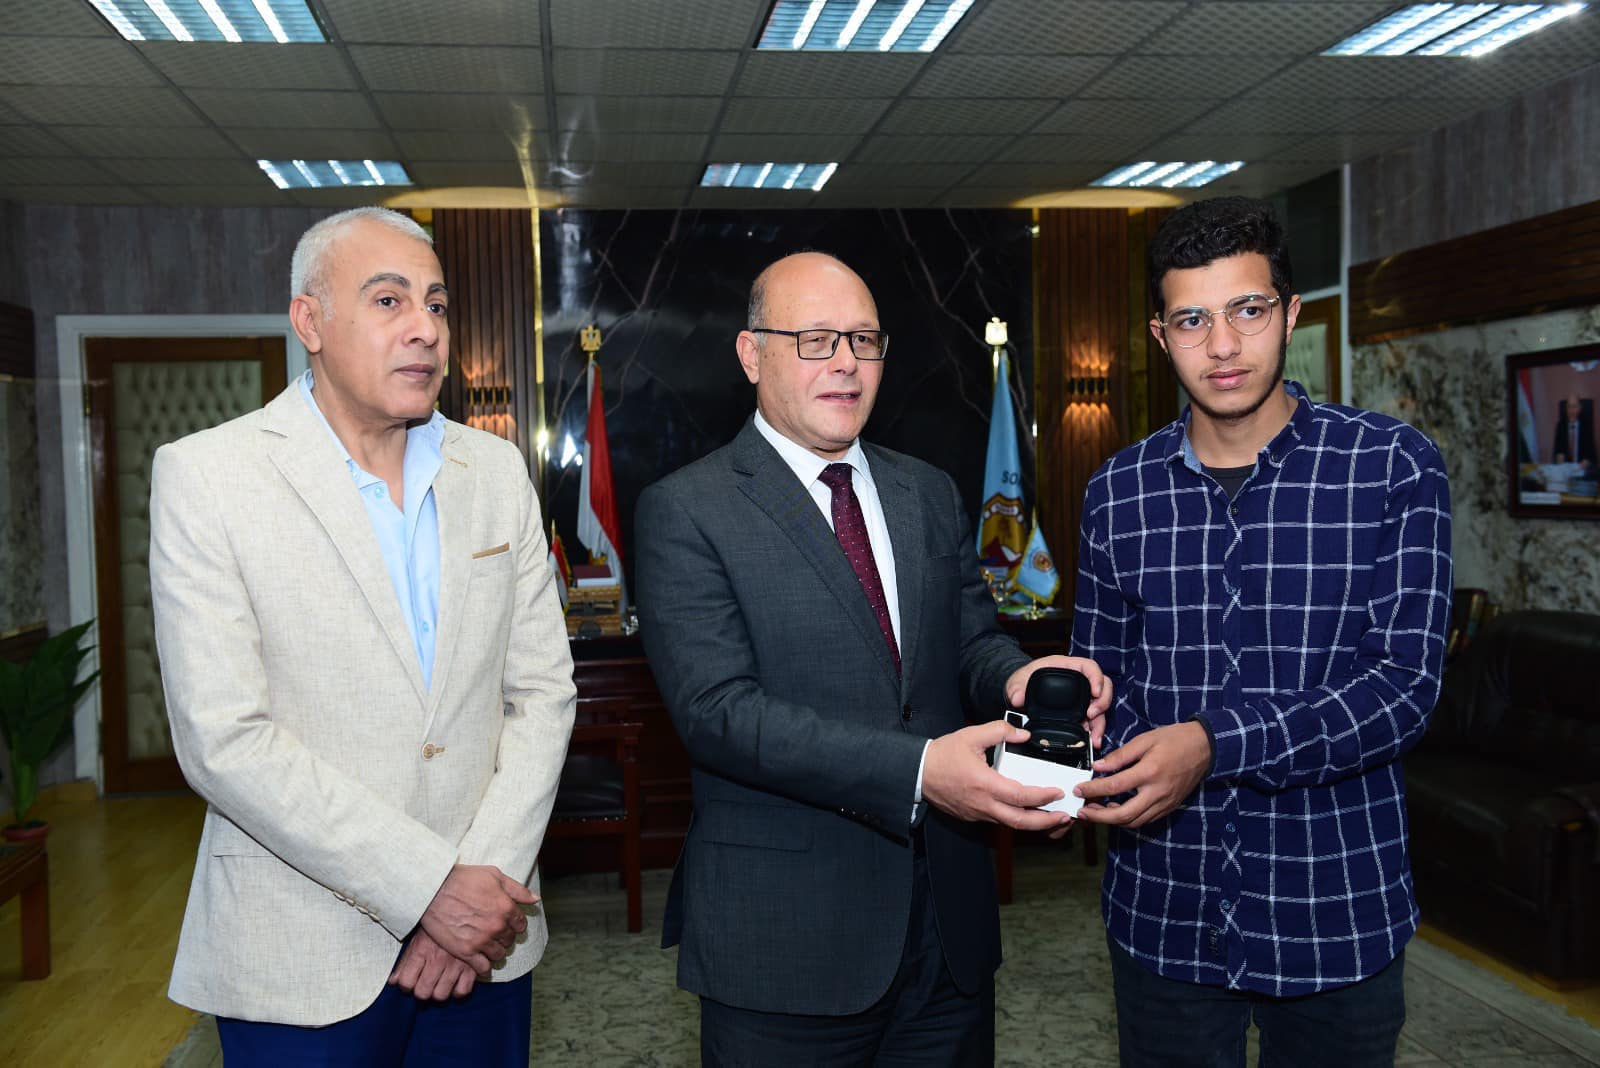 Sohag University handed Prosthetic Devices for 3 Disabled Students